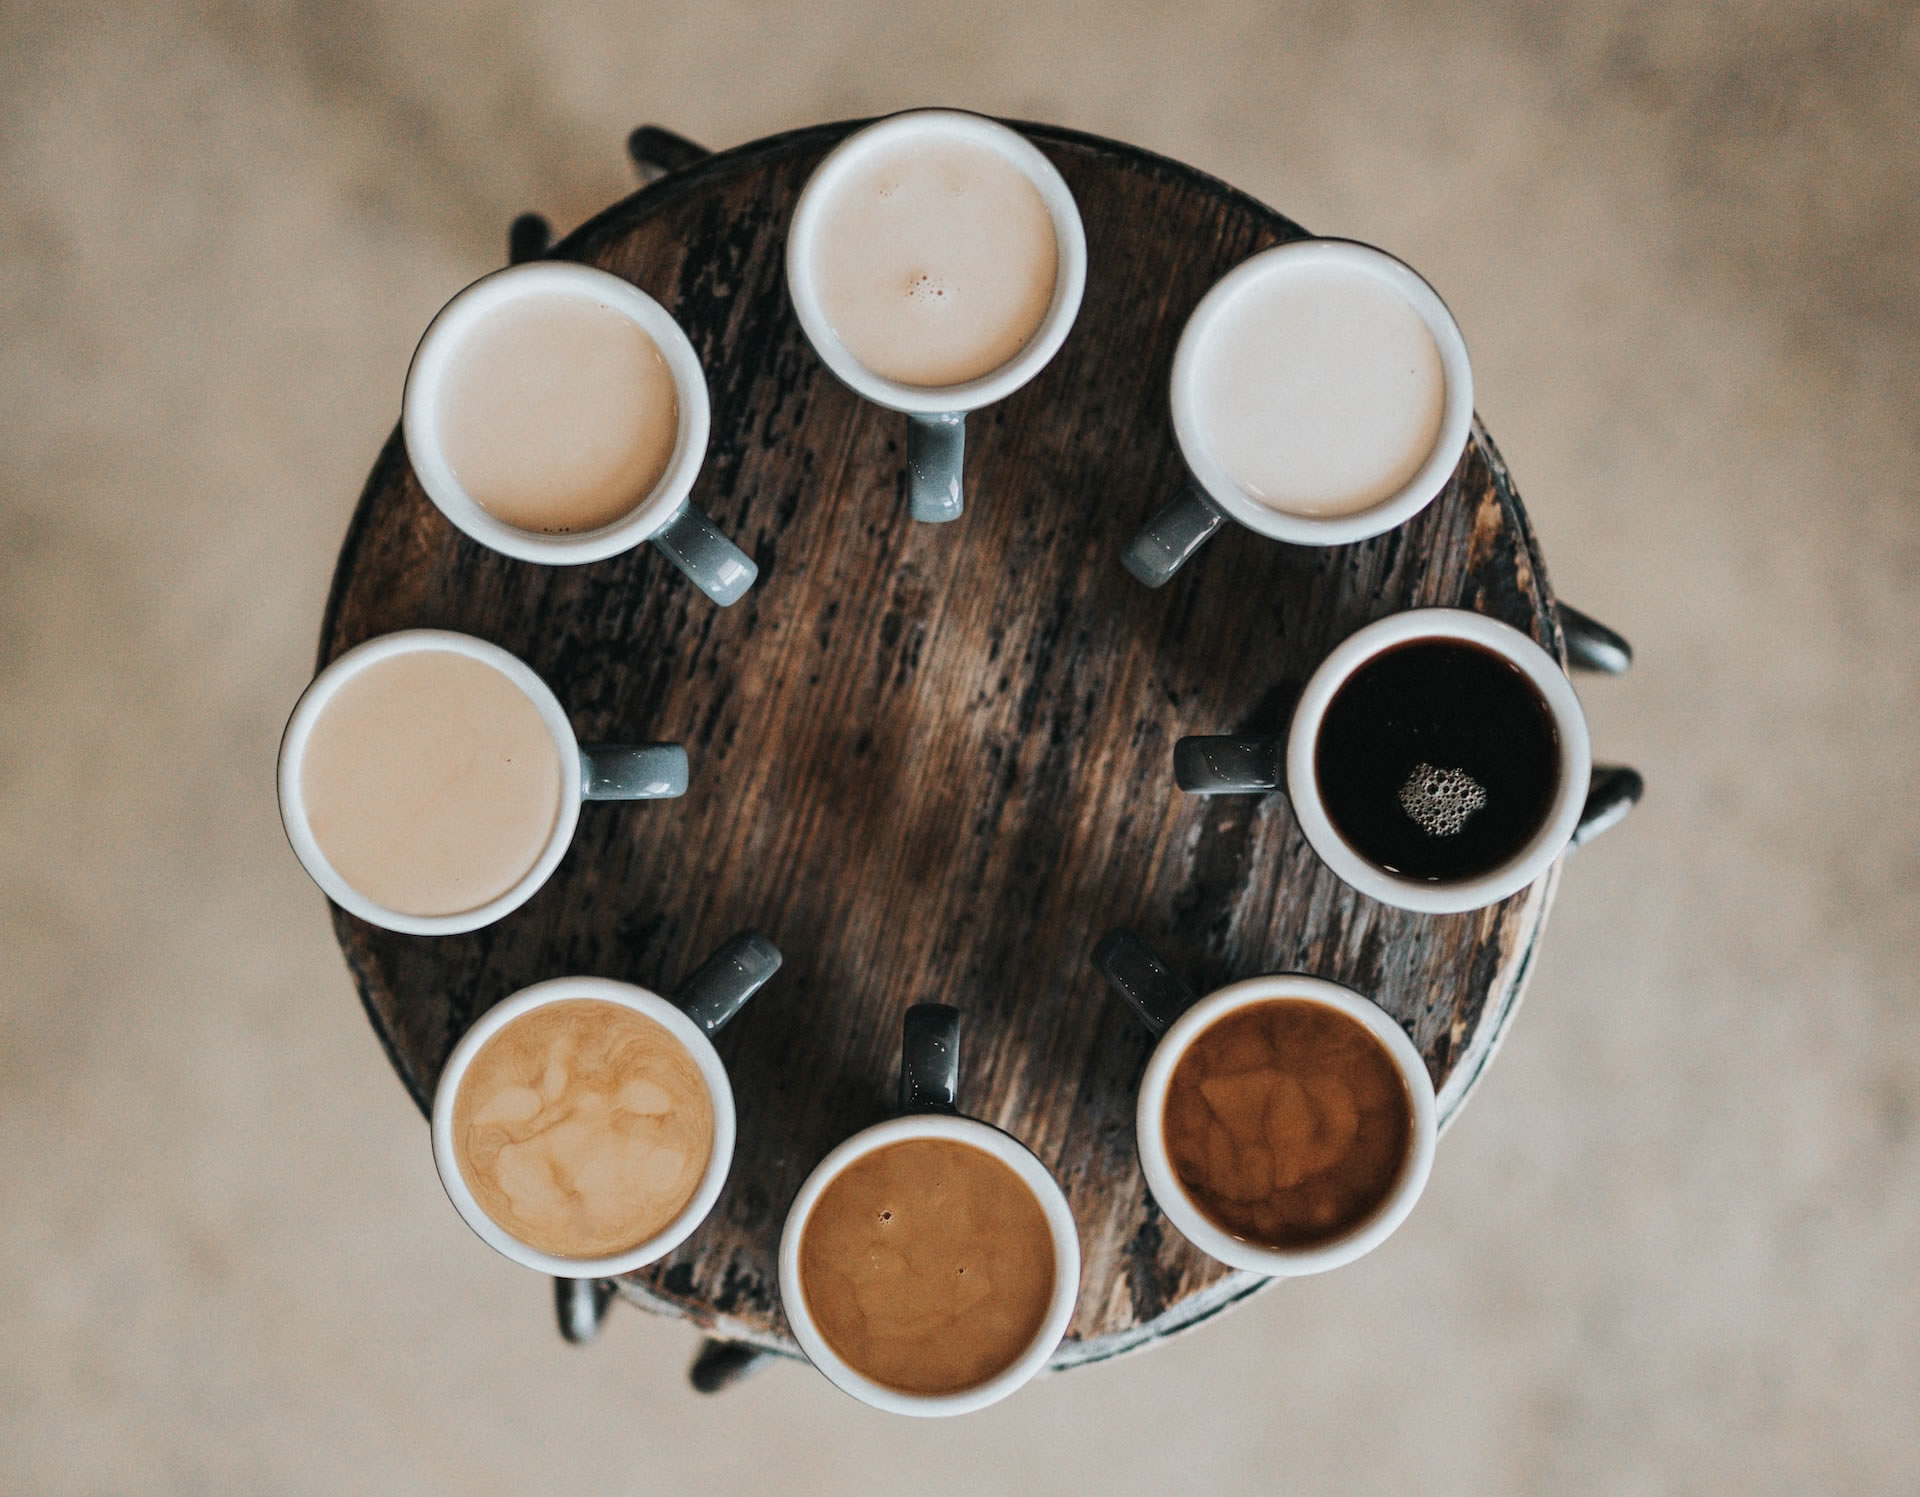 8 coffee cups in a circle suggesting choices